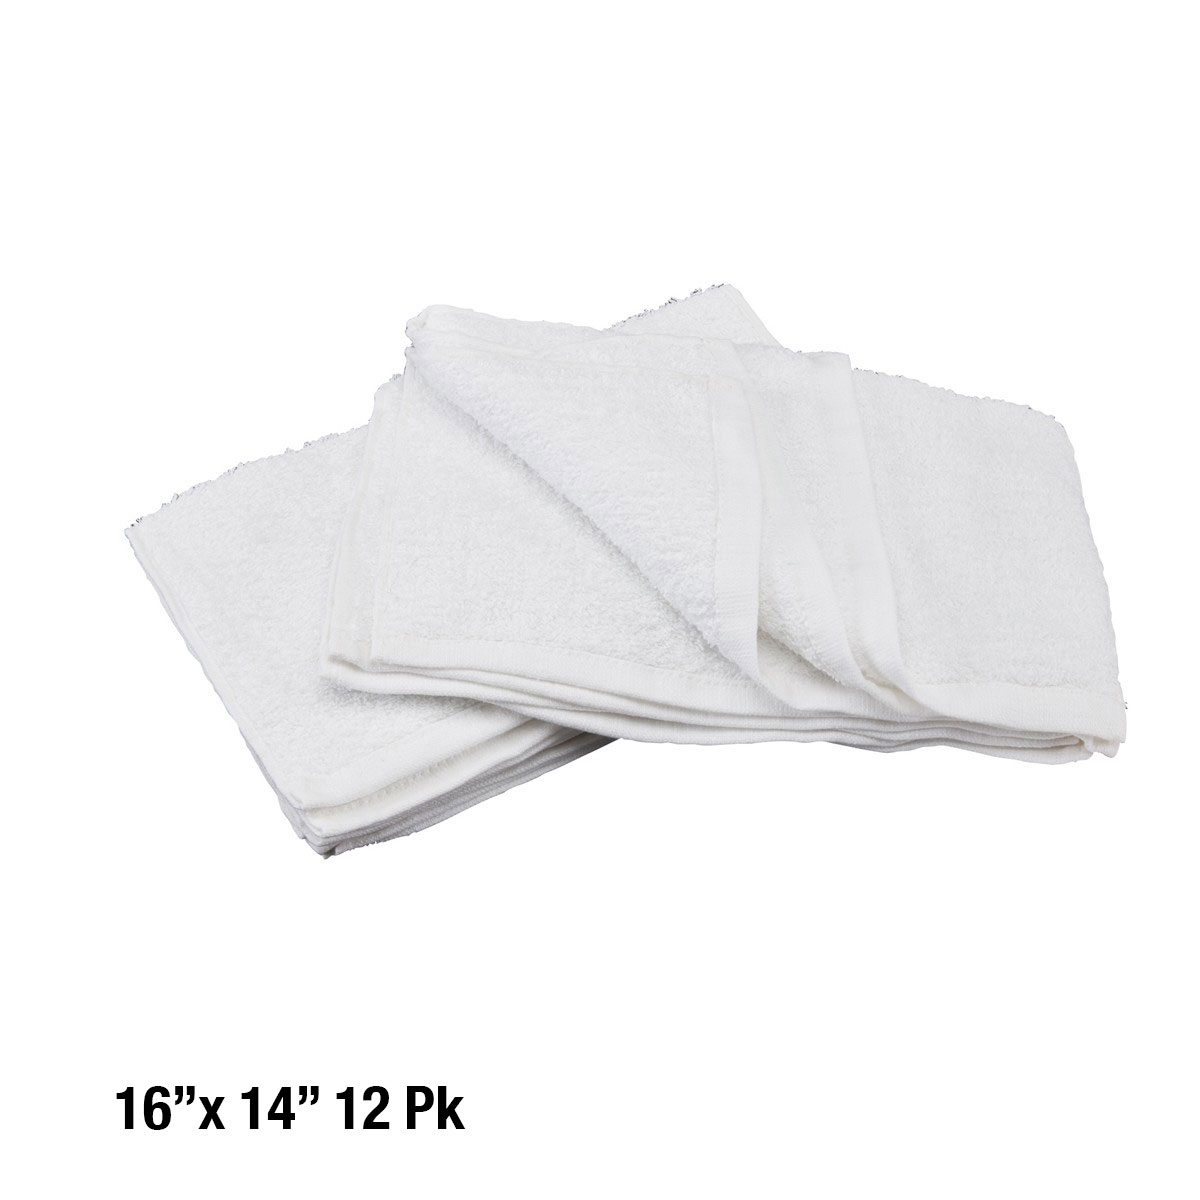 Coupons for GRANT’S Cotton Terry Cleaning Towel 14 in. x 16 in. – 12 Pk ...